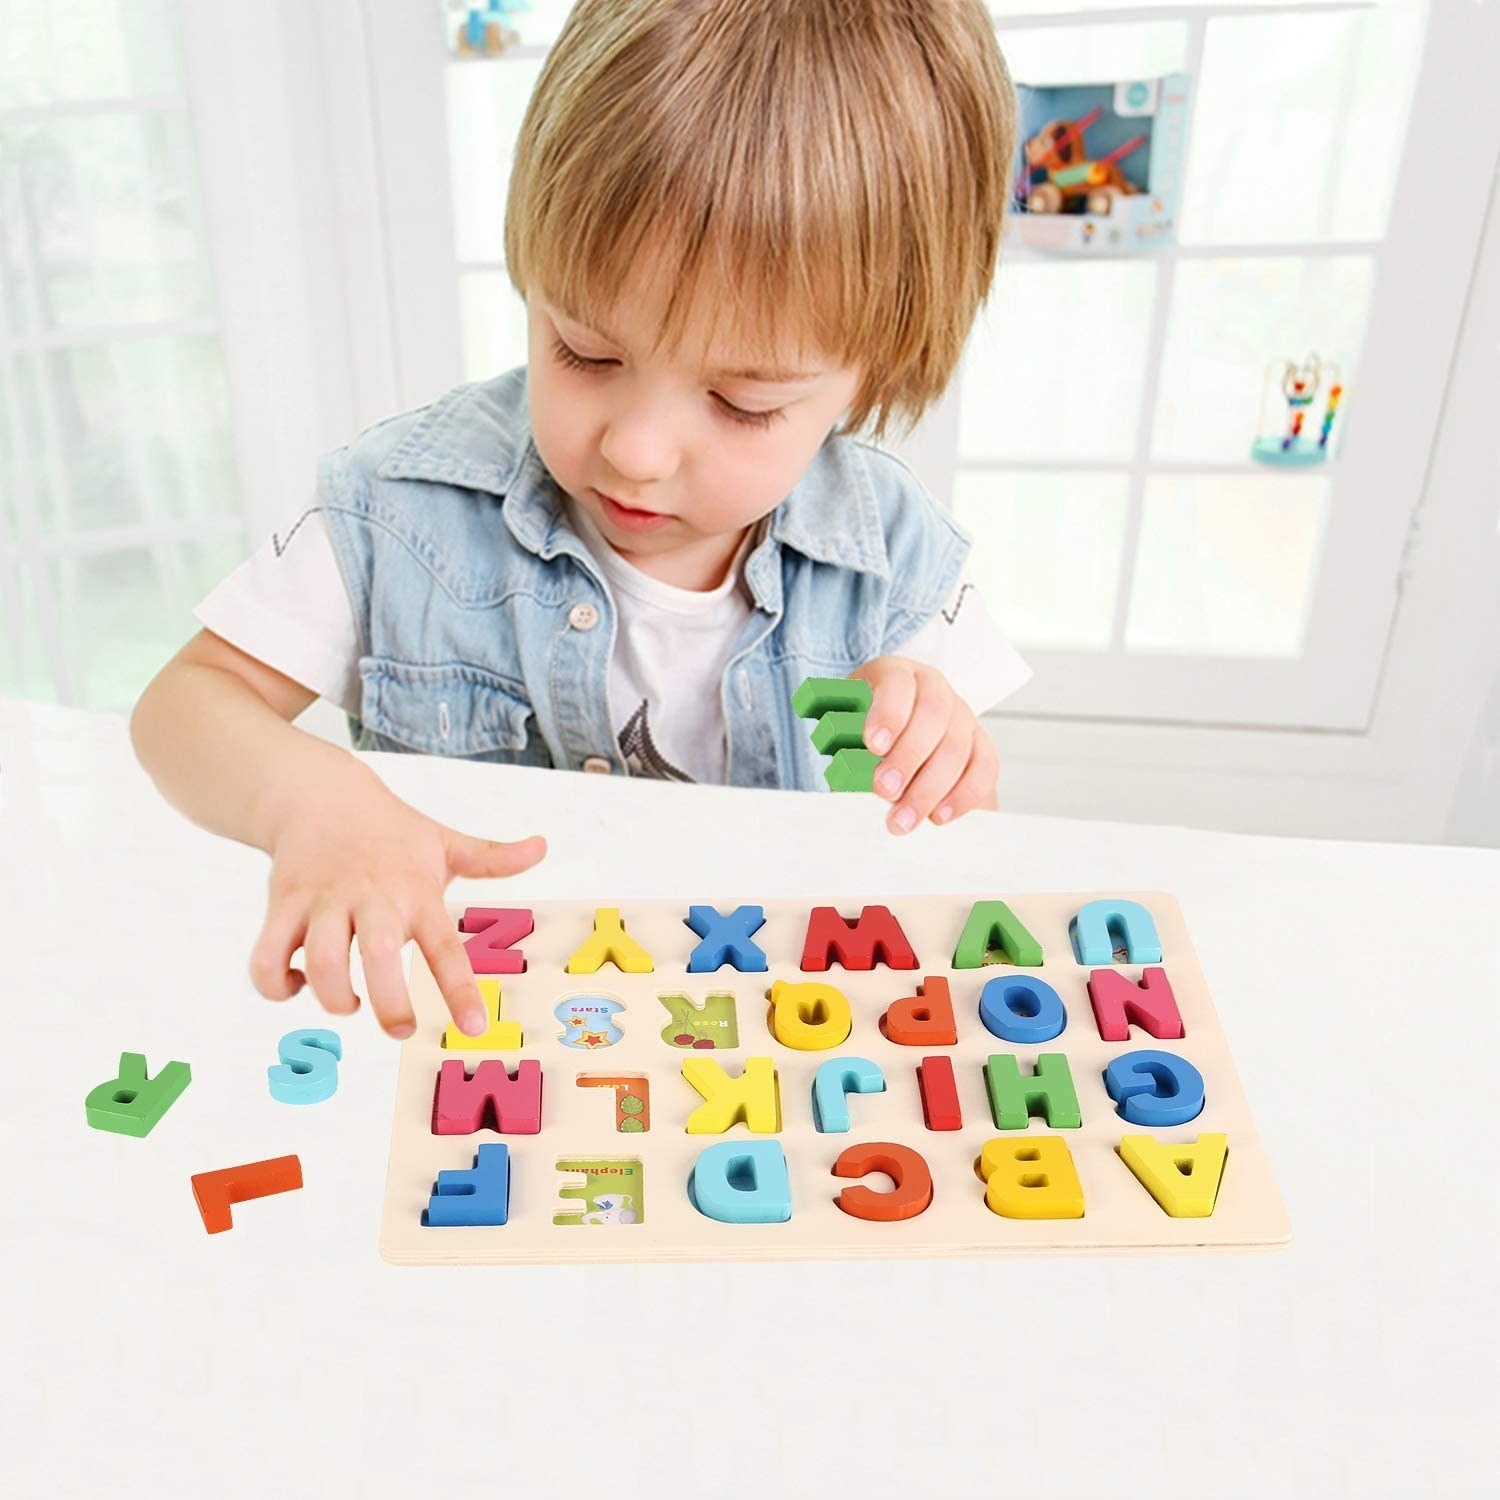 A child playing with an alphabet puzzle